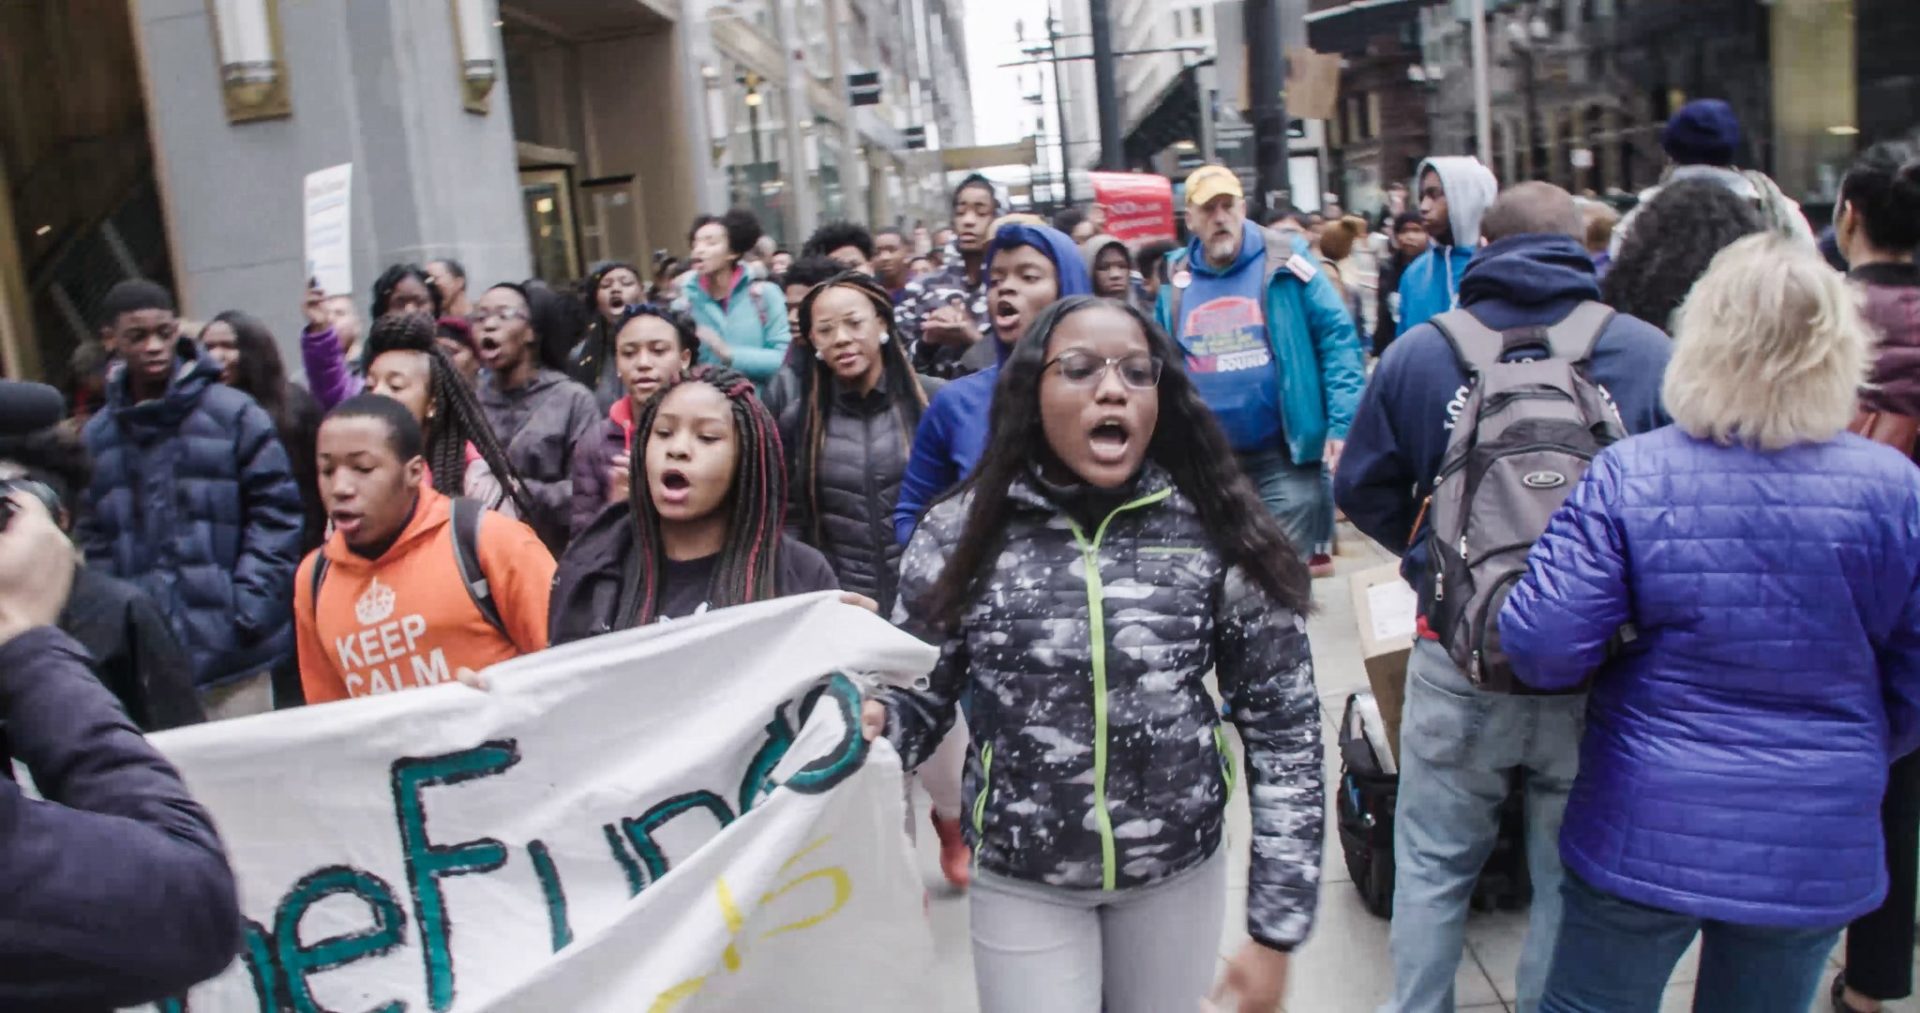 A crowd of mostly Black young people are marching down a city sidewalk with banners. Most of their mouths are open as if chanting.